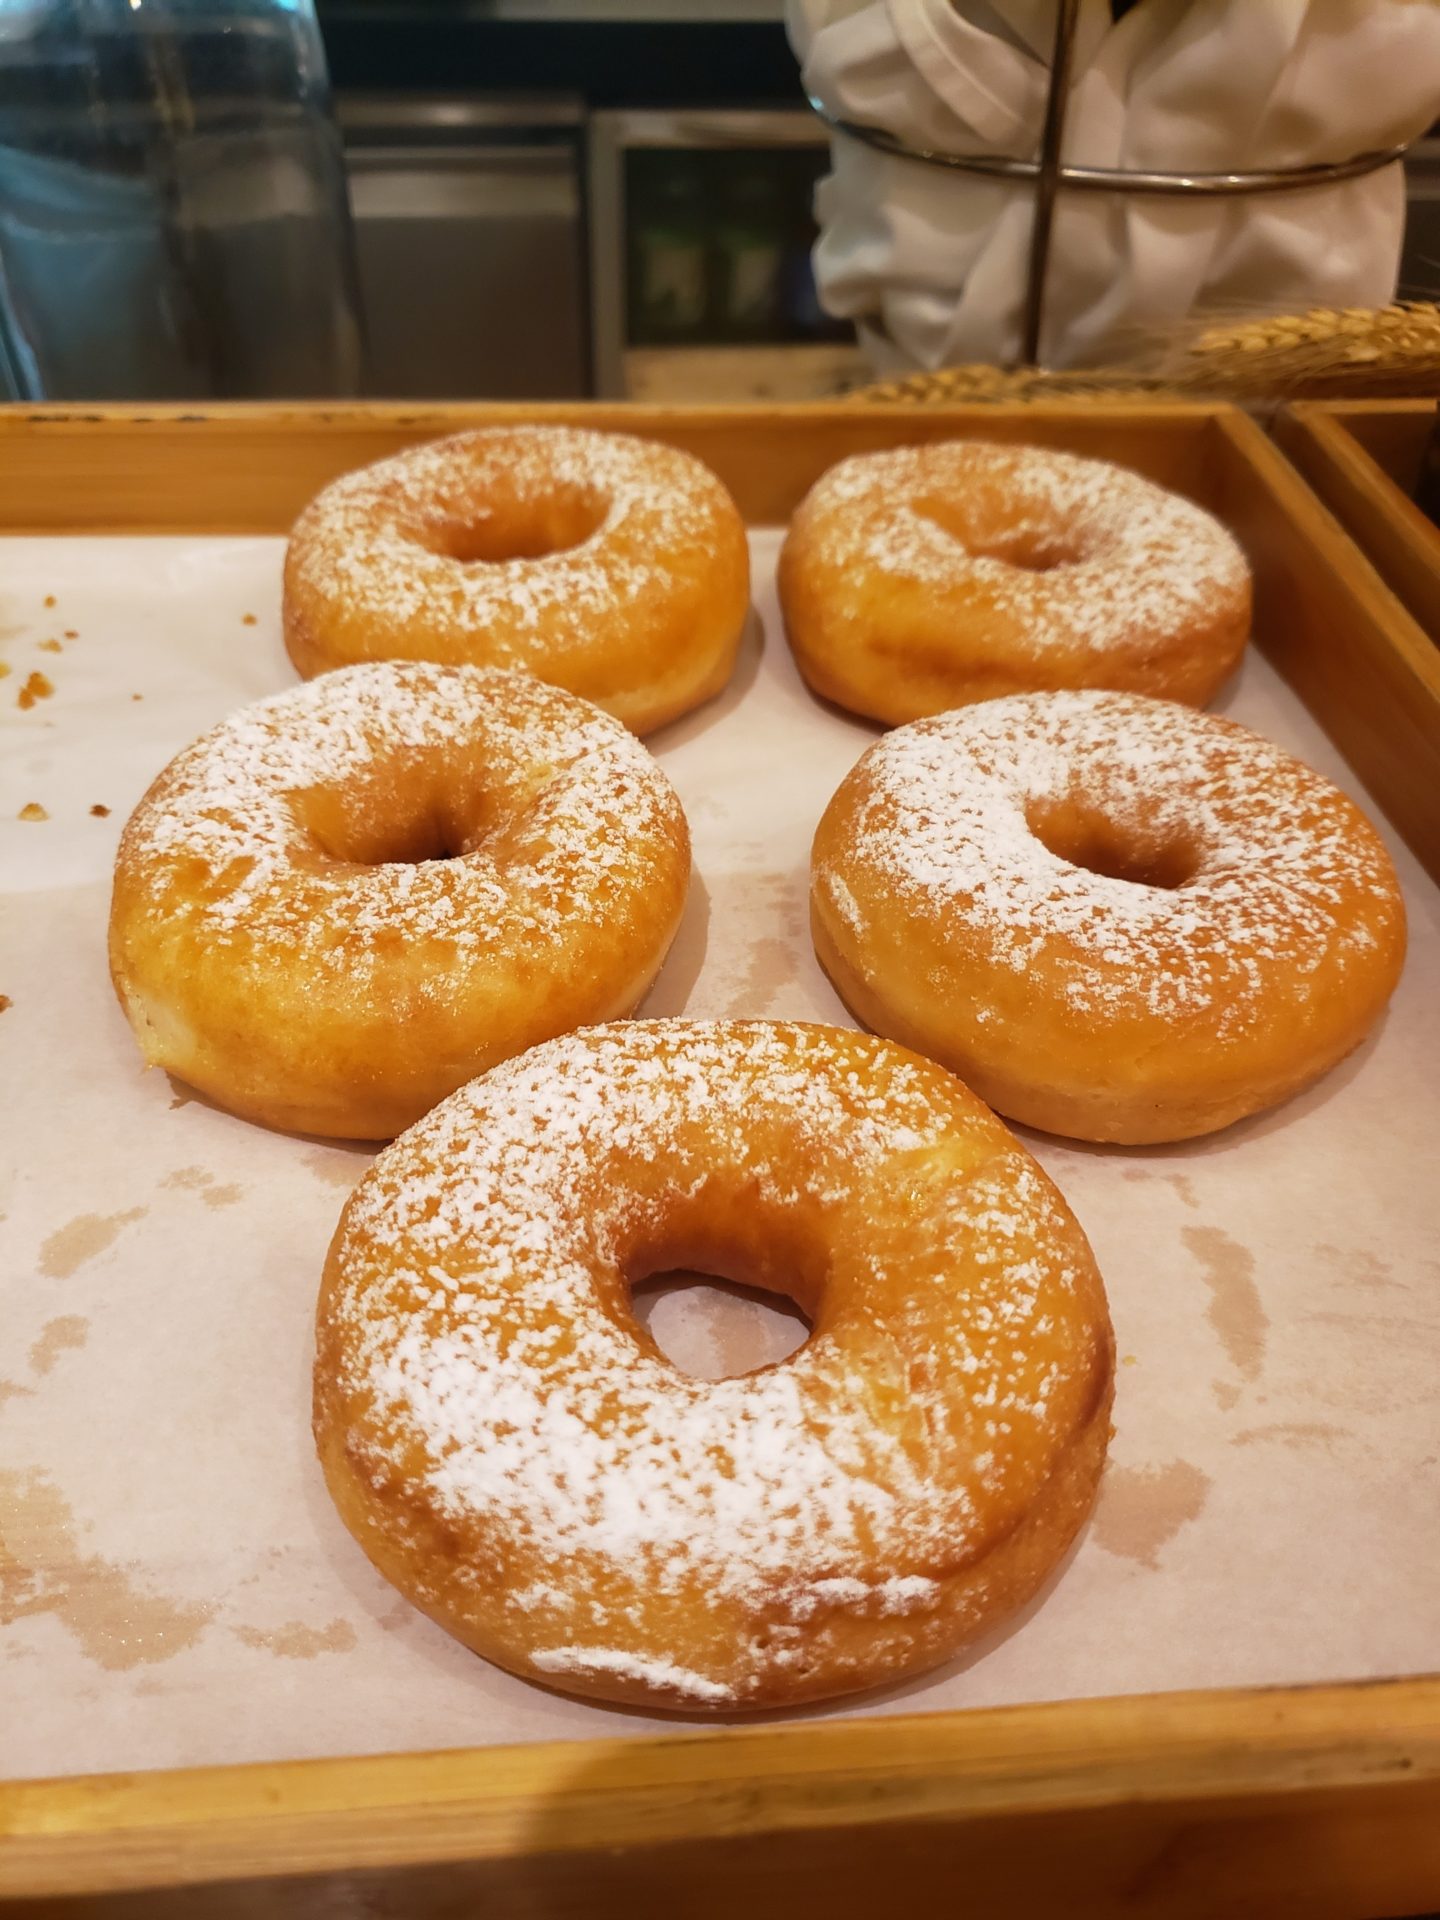 a tray of donuts with powdered sugar